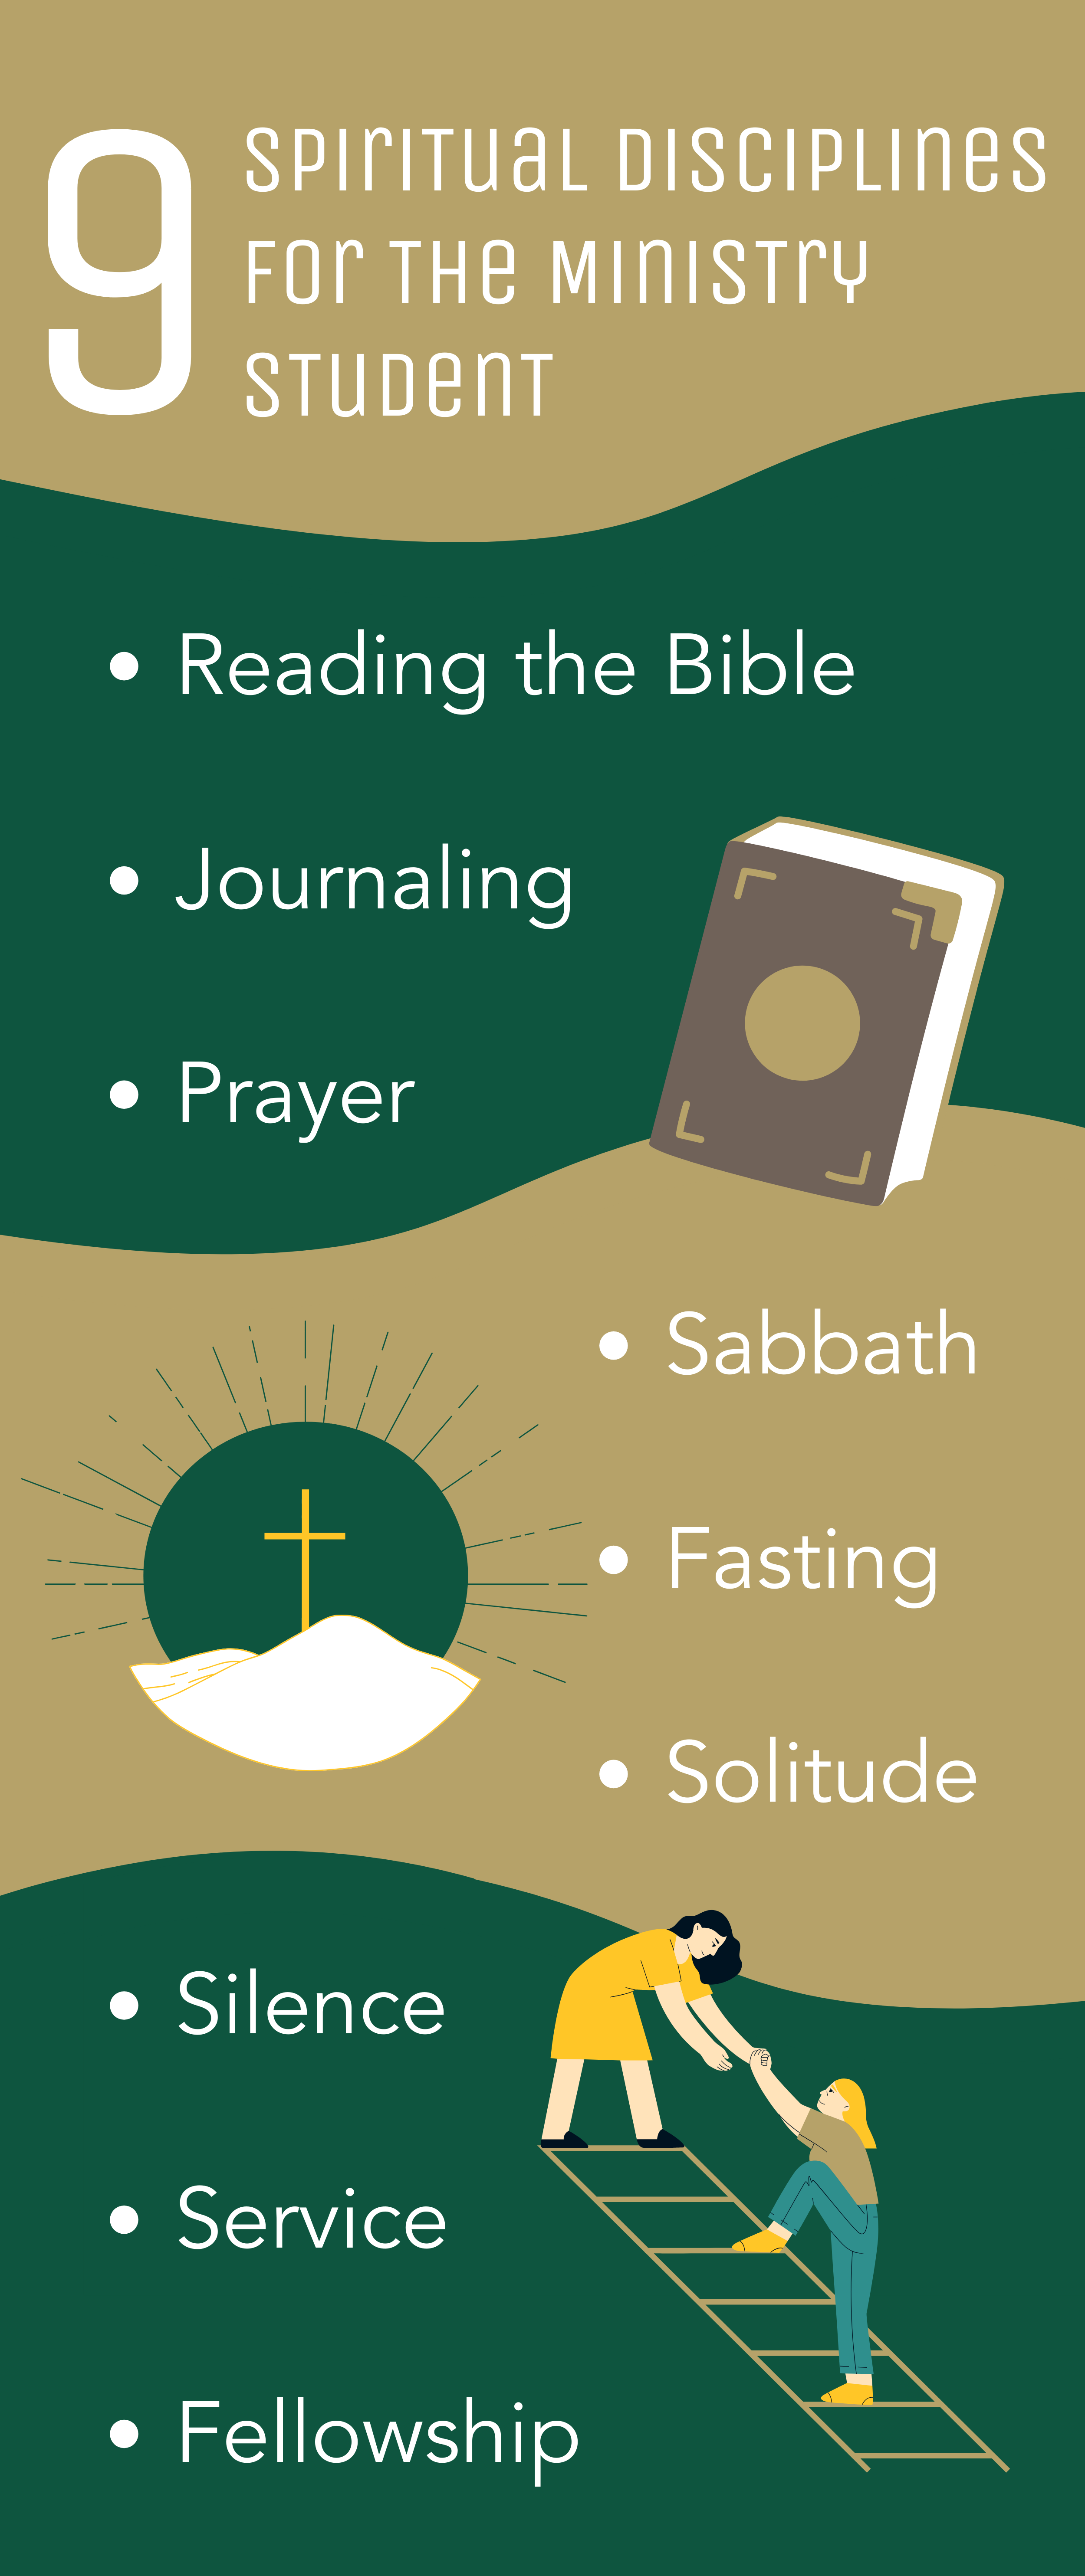 9 Essential Spiritual Disciplines for the Ministry Student